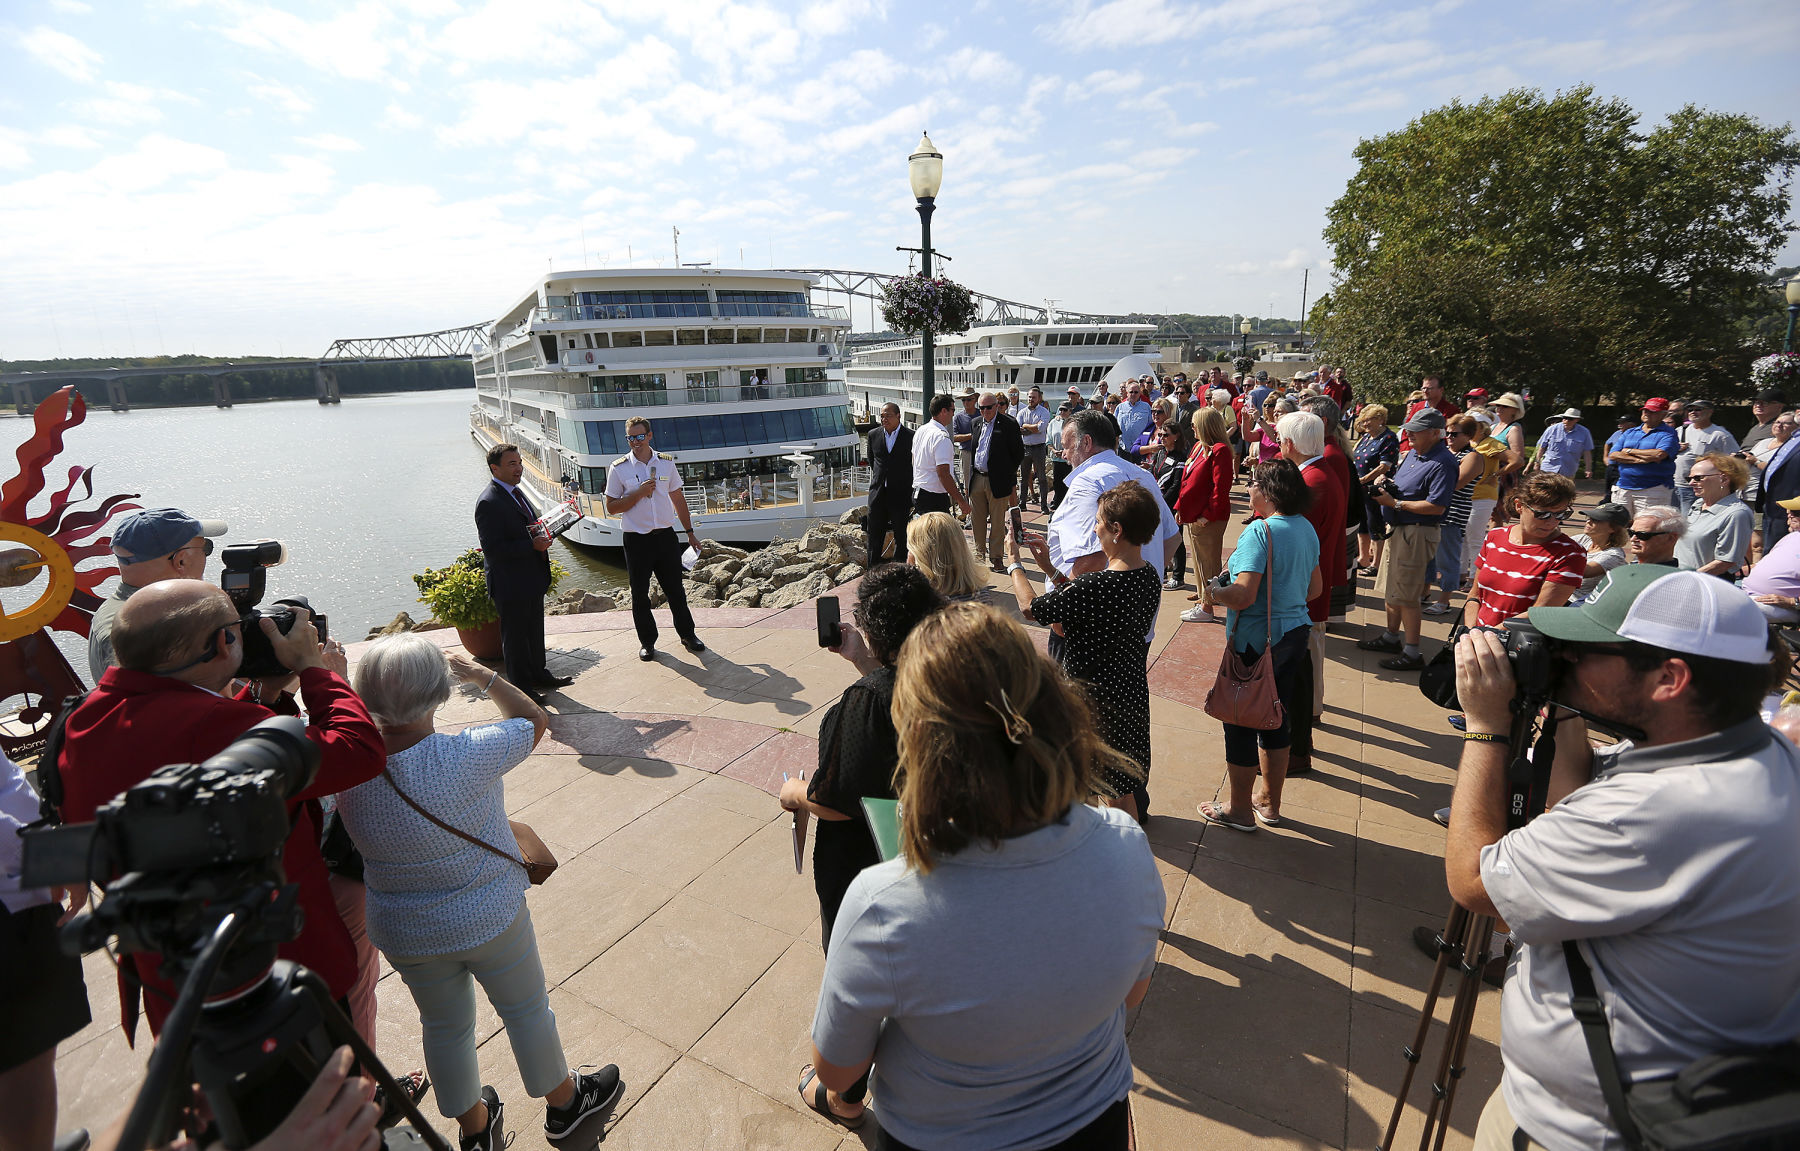 People gather at the Port of Dubuque for a ribbon cutting for the Viking Mississippi cruise ship that docked for the first time on Tuesday, Sept. 6, 2022.    PHOTO CREDIT: Dave Kettering